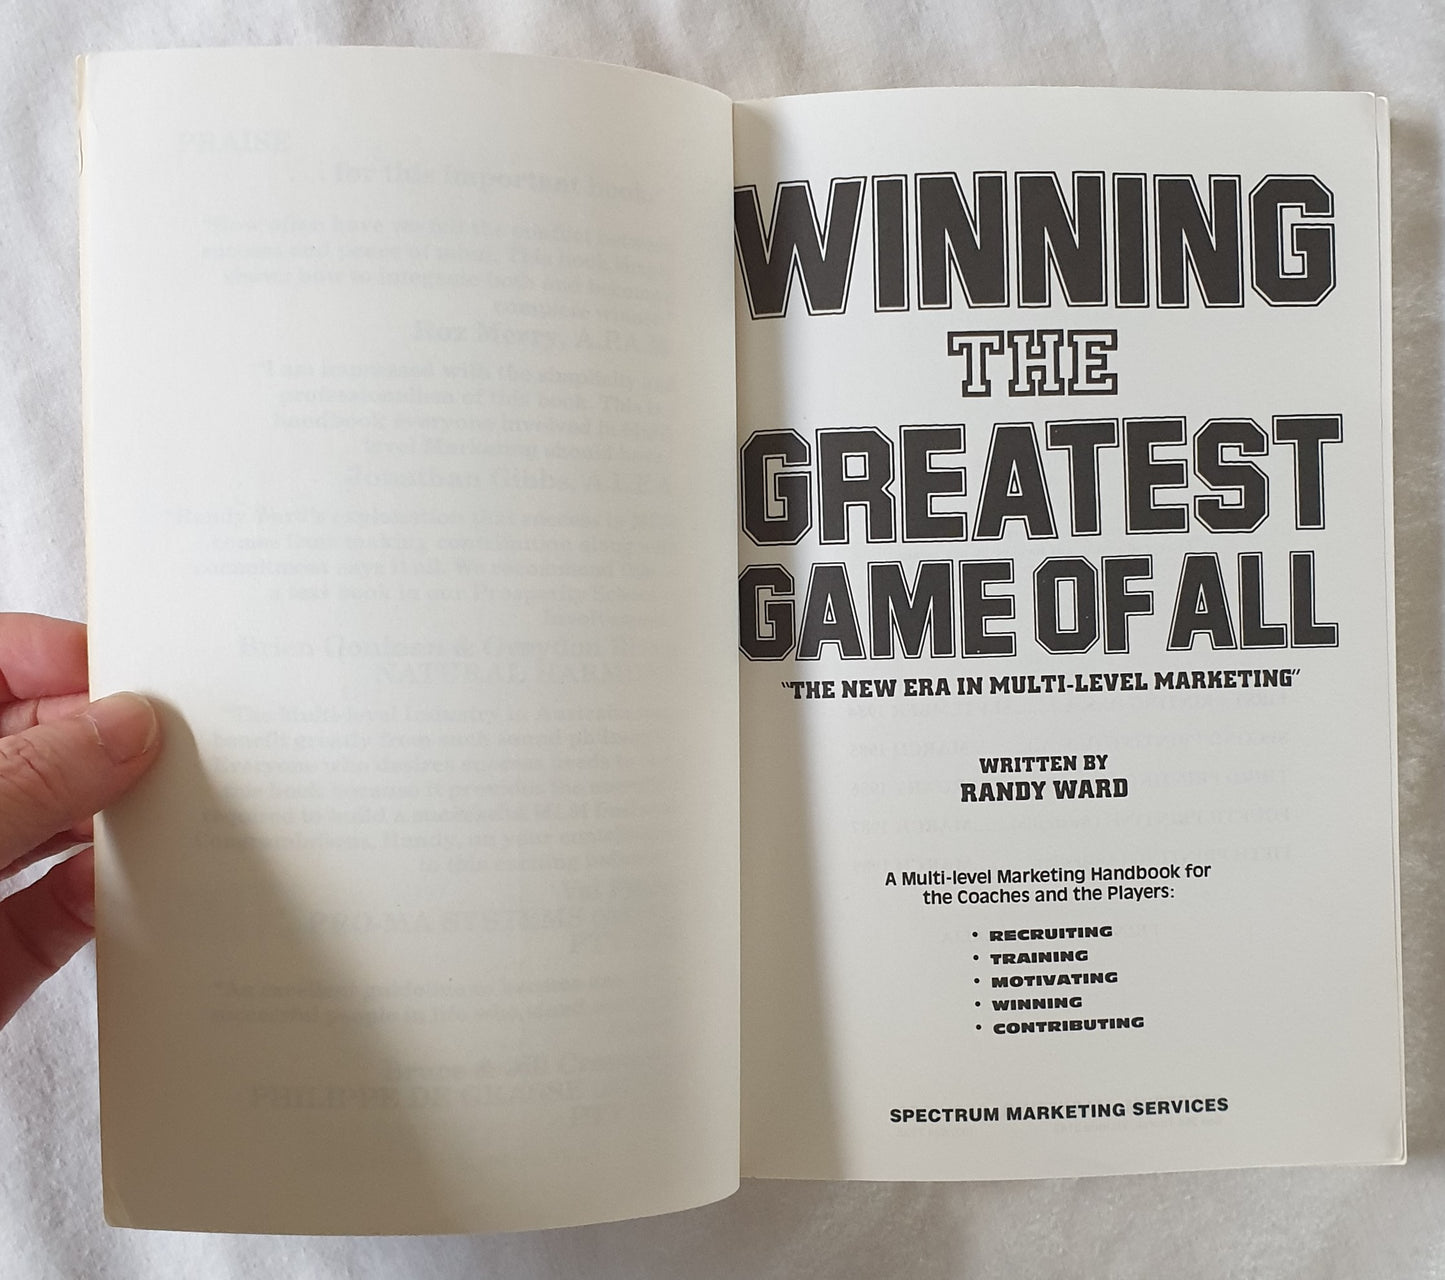 Winning the Greatest Game of All by Randy Ward